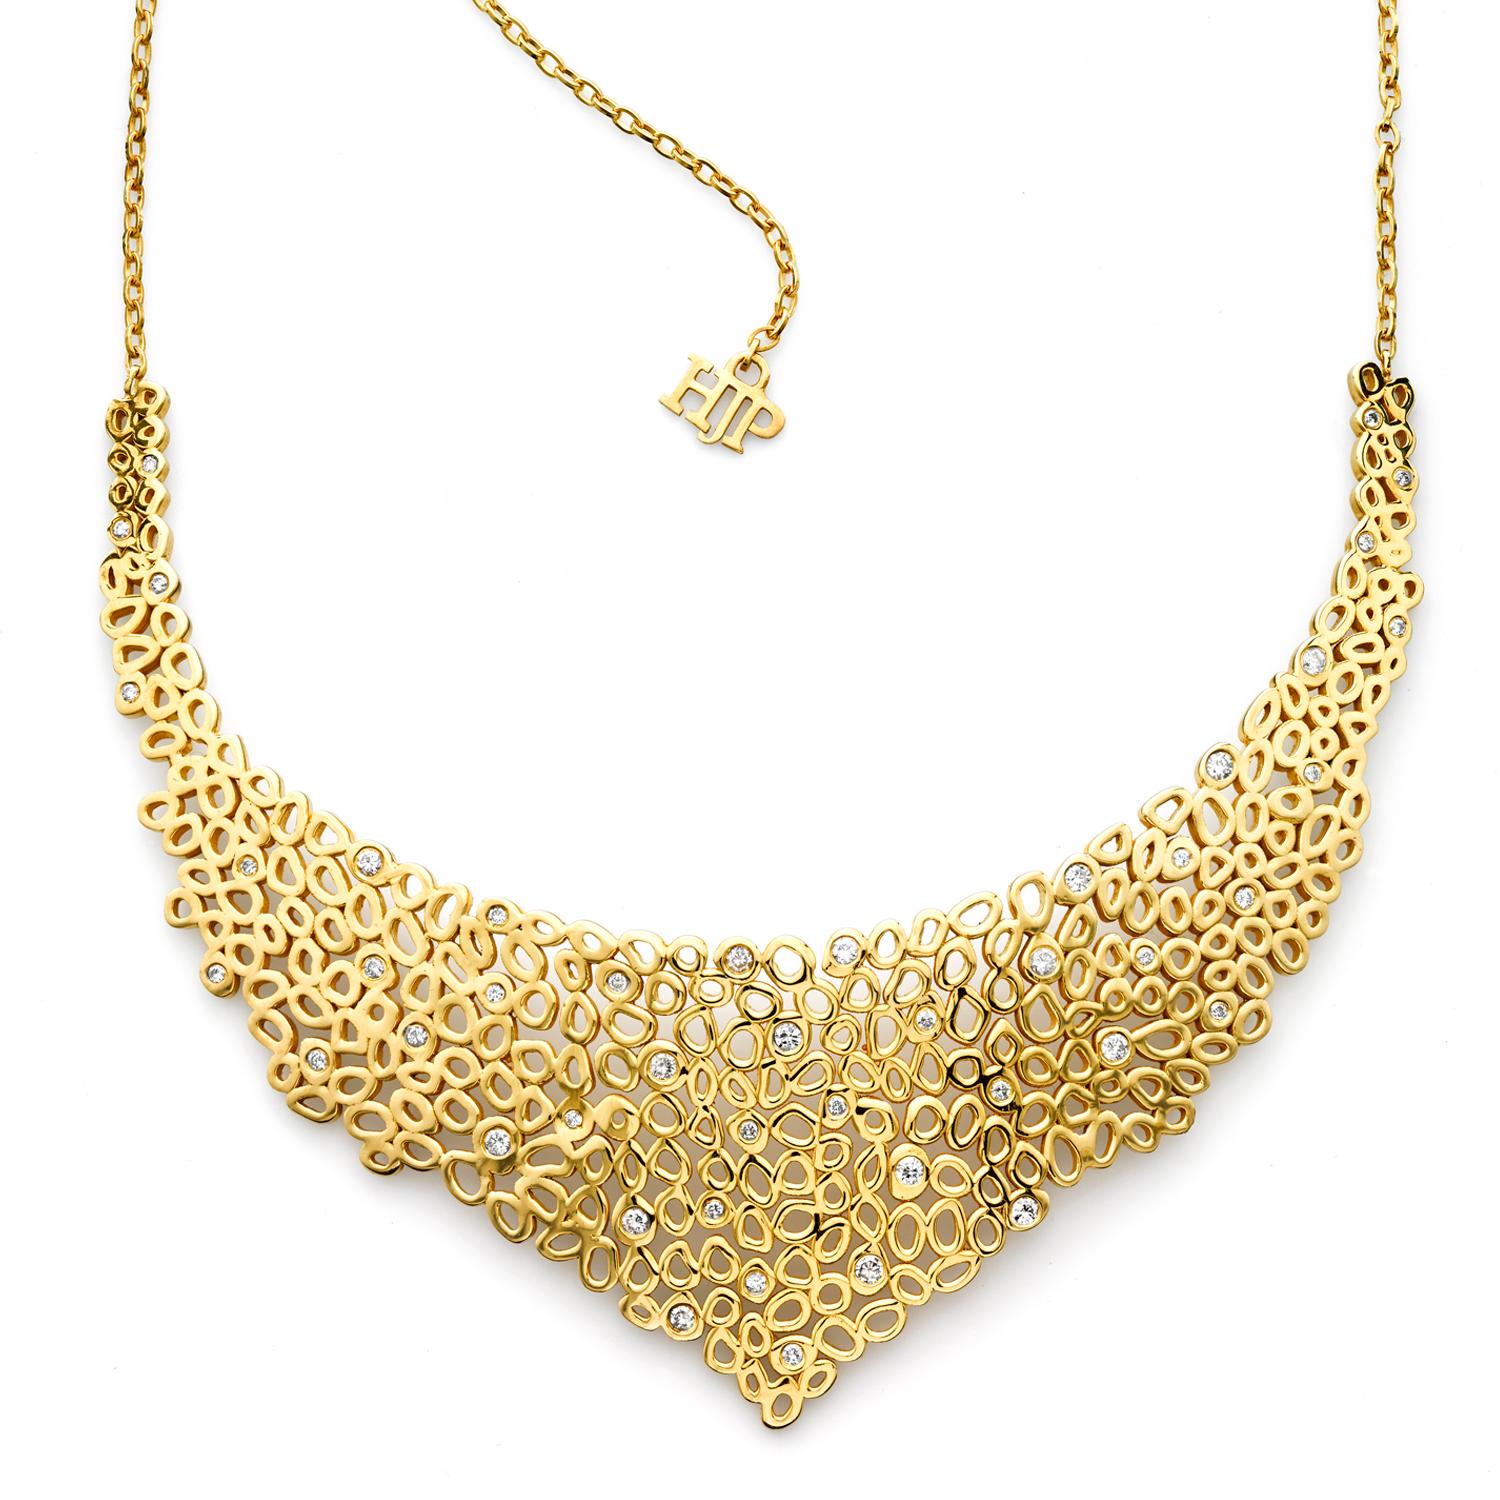 This statement short collar necklace is a great piece to wear to the gala or just a night out with those you love. One of those pieces where you want to look carefully at the elaborate details consisting of Hi June Parker's signature organic circle